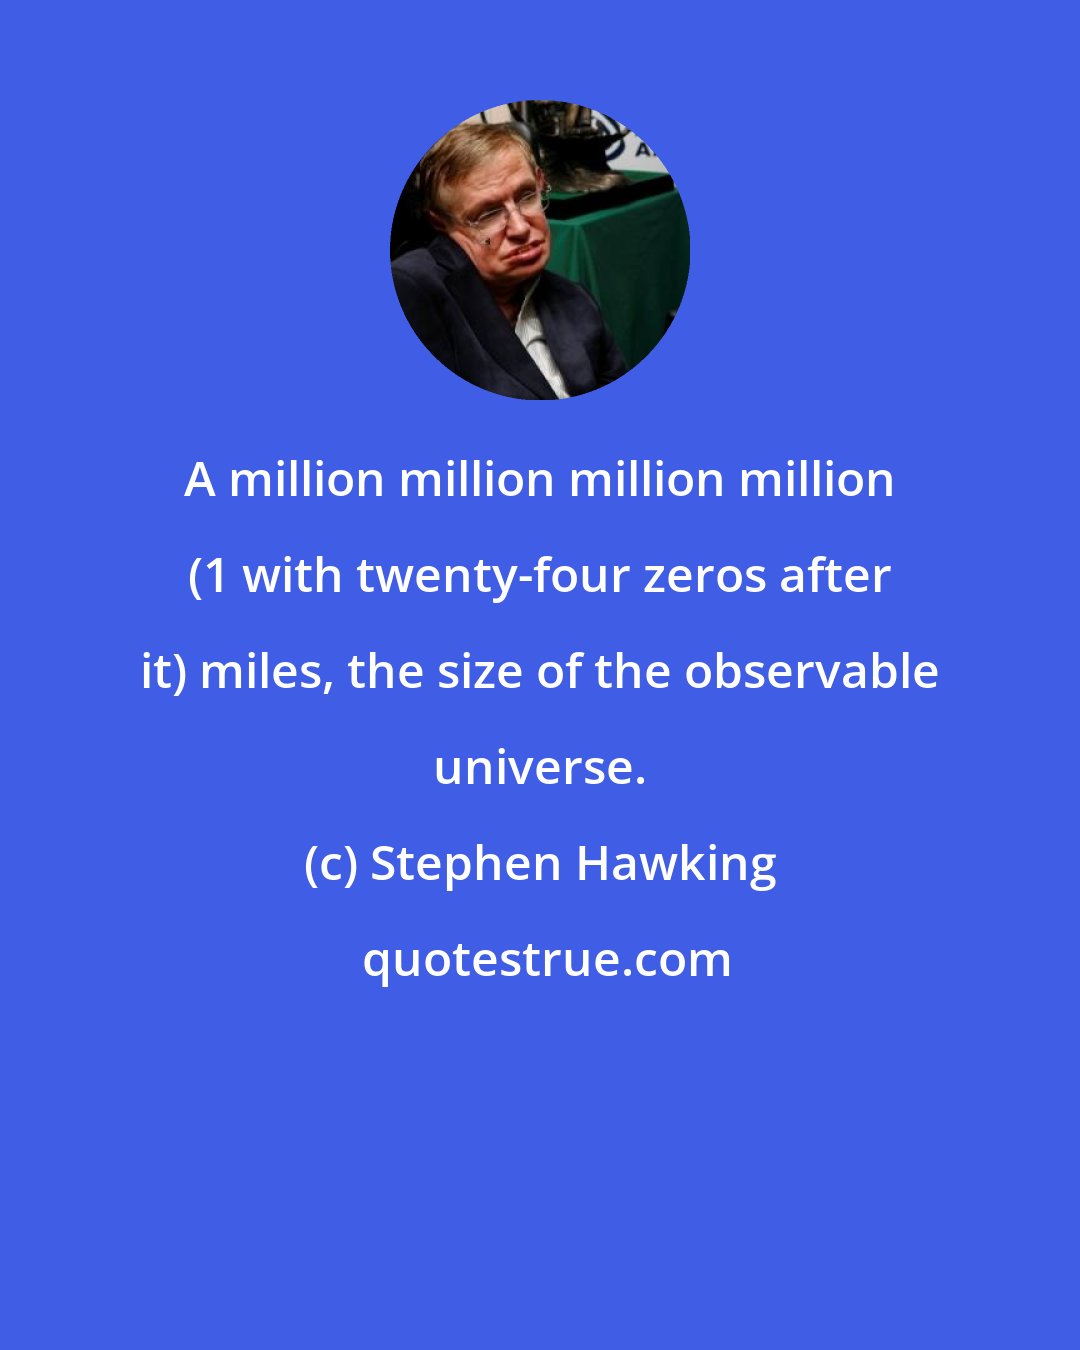 Stephen Hawking: A million million million million (1 with twenty-four zeros after it) miles, the size of the observable universe.